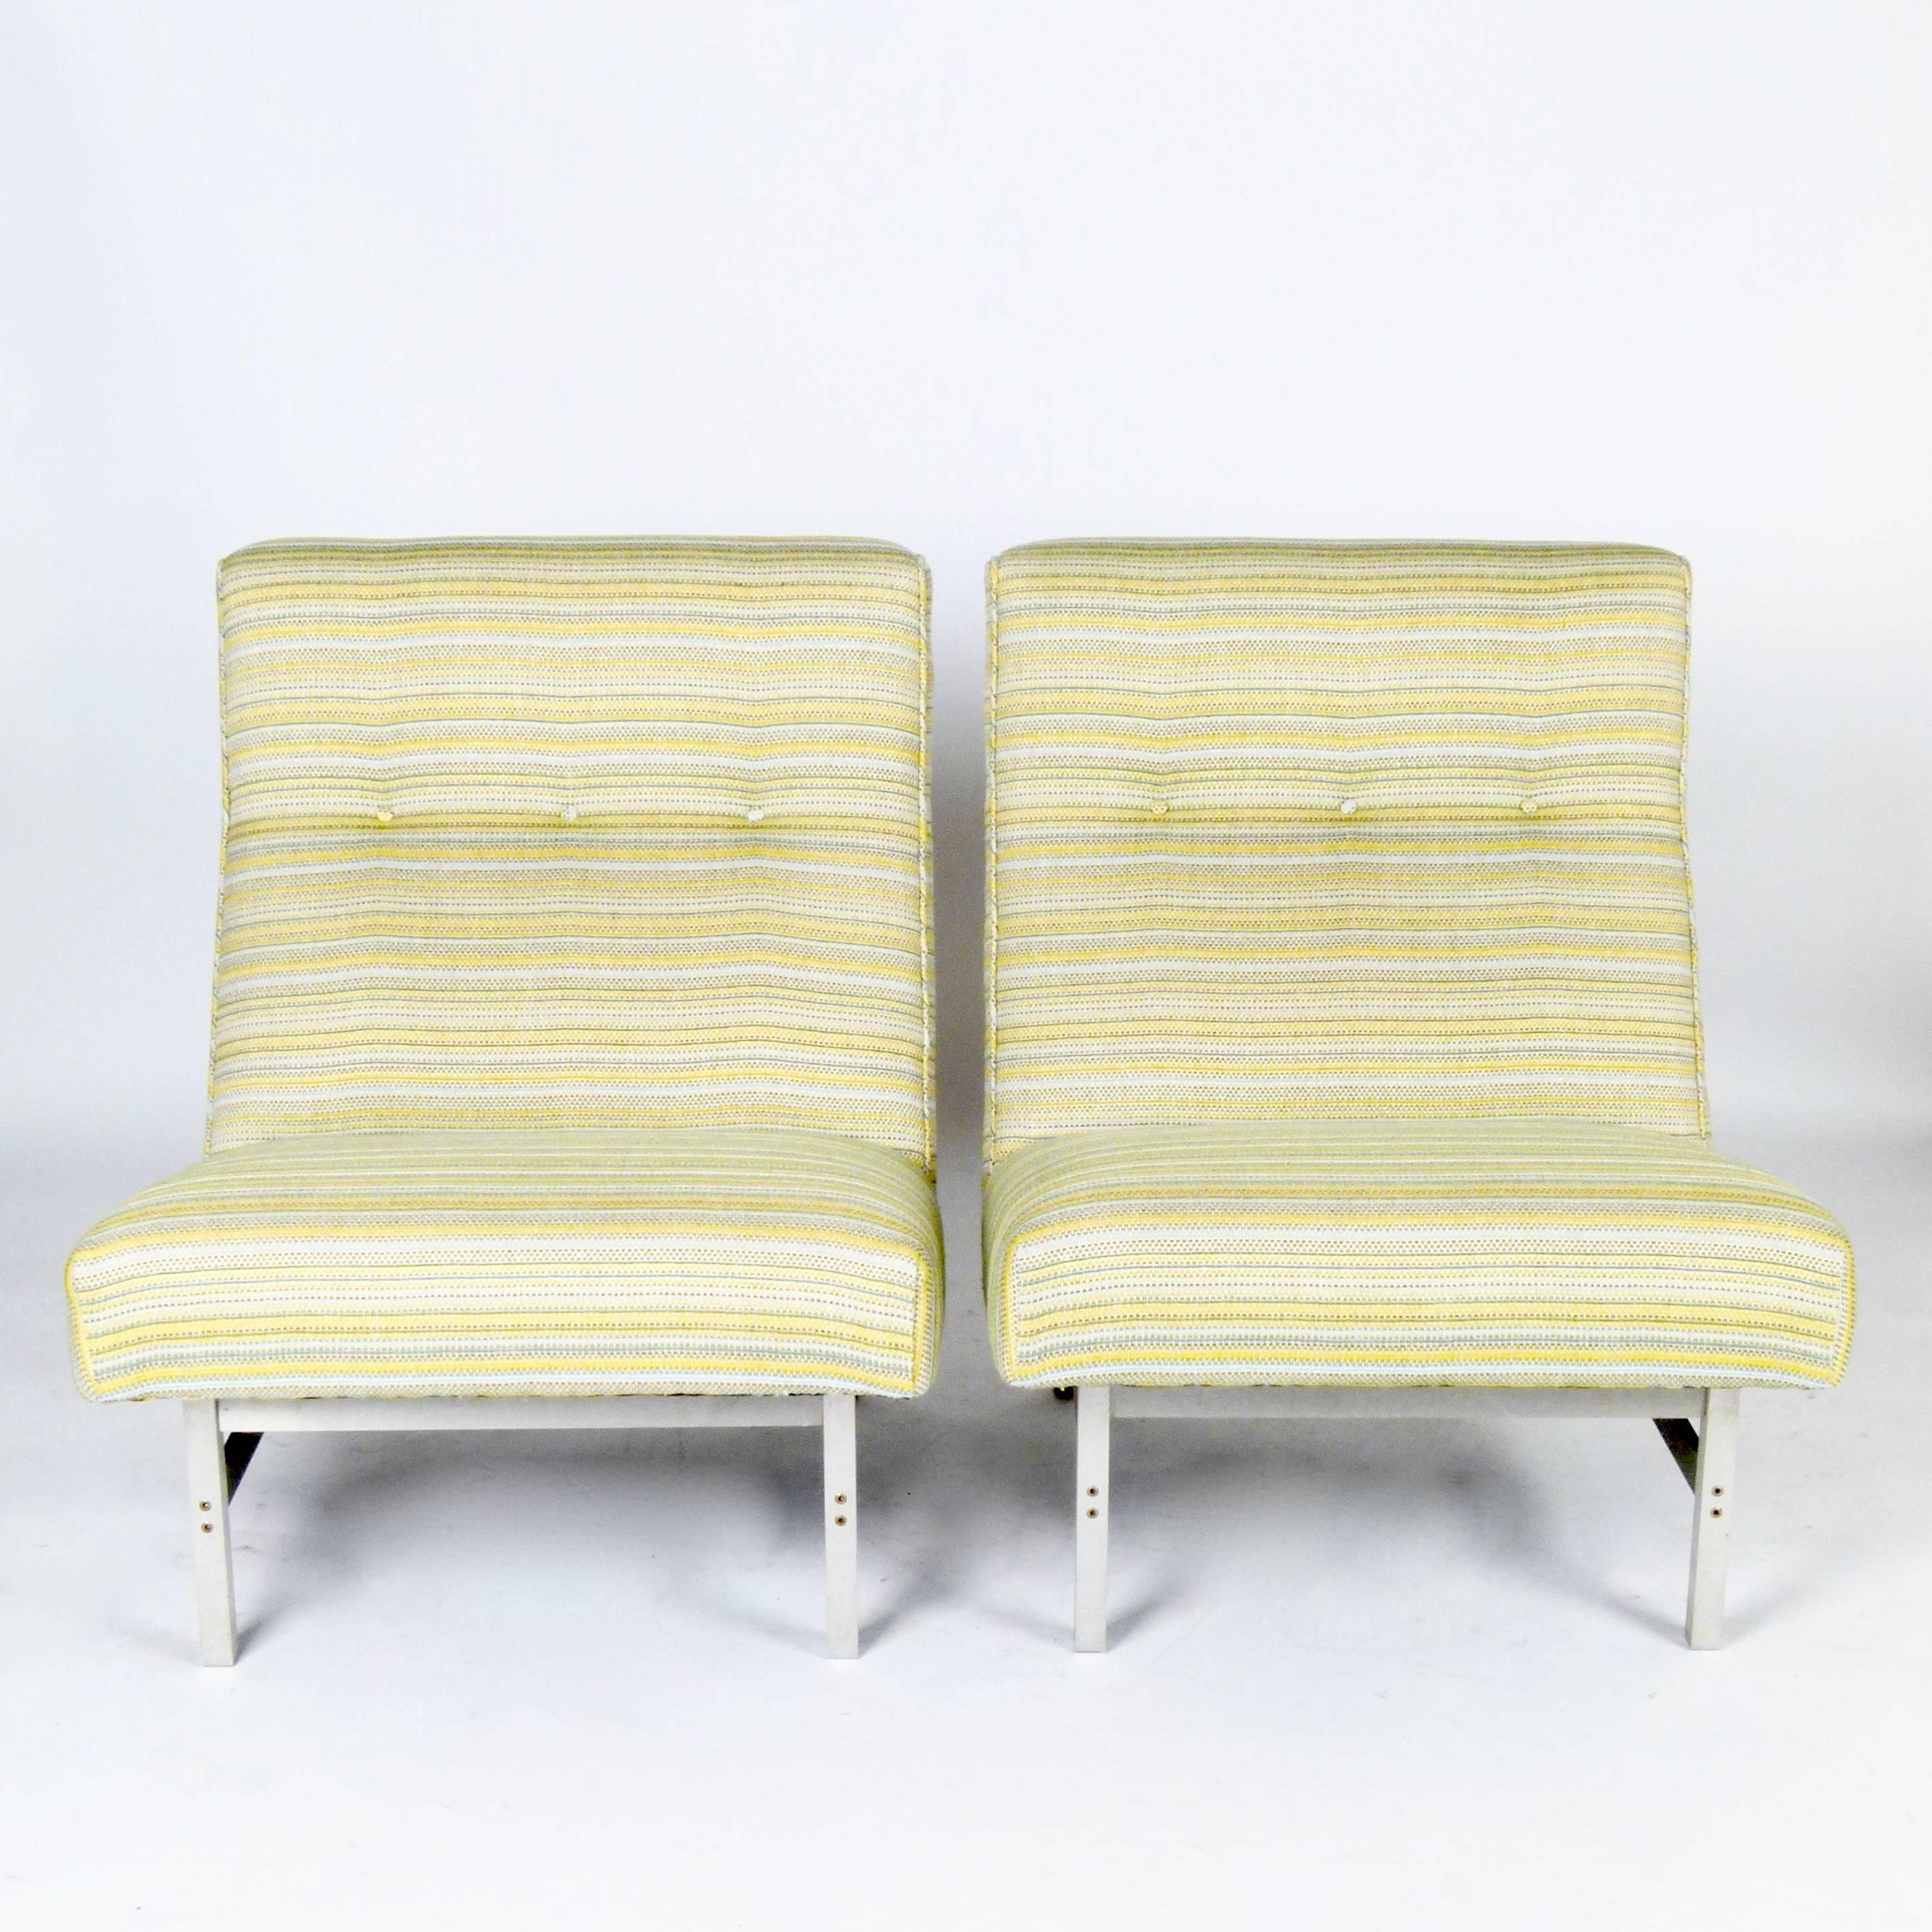 American Pair of Florence Knoll Lounge Chairs For Sale